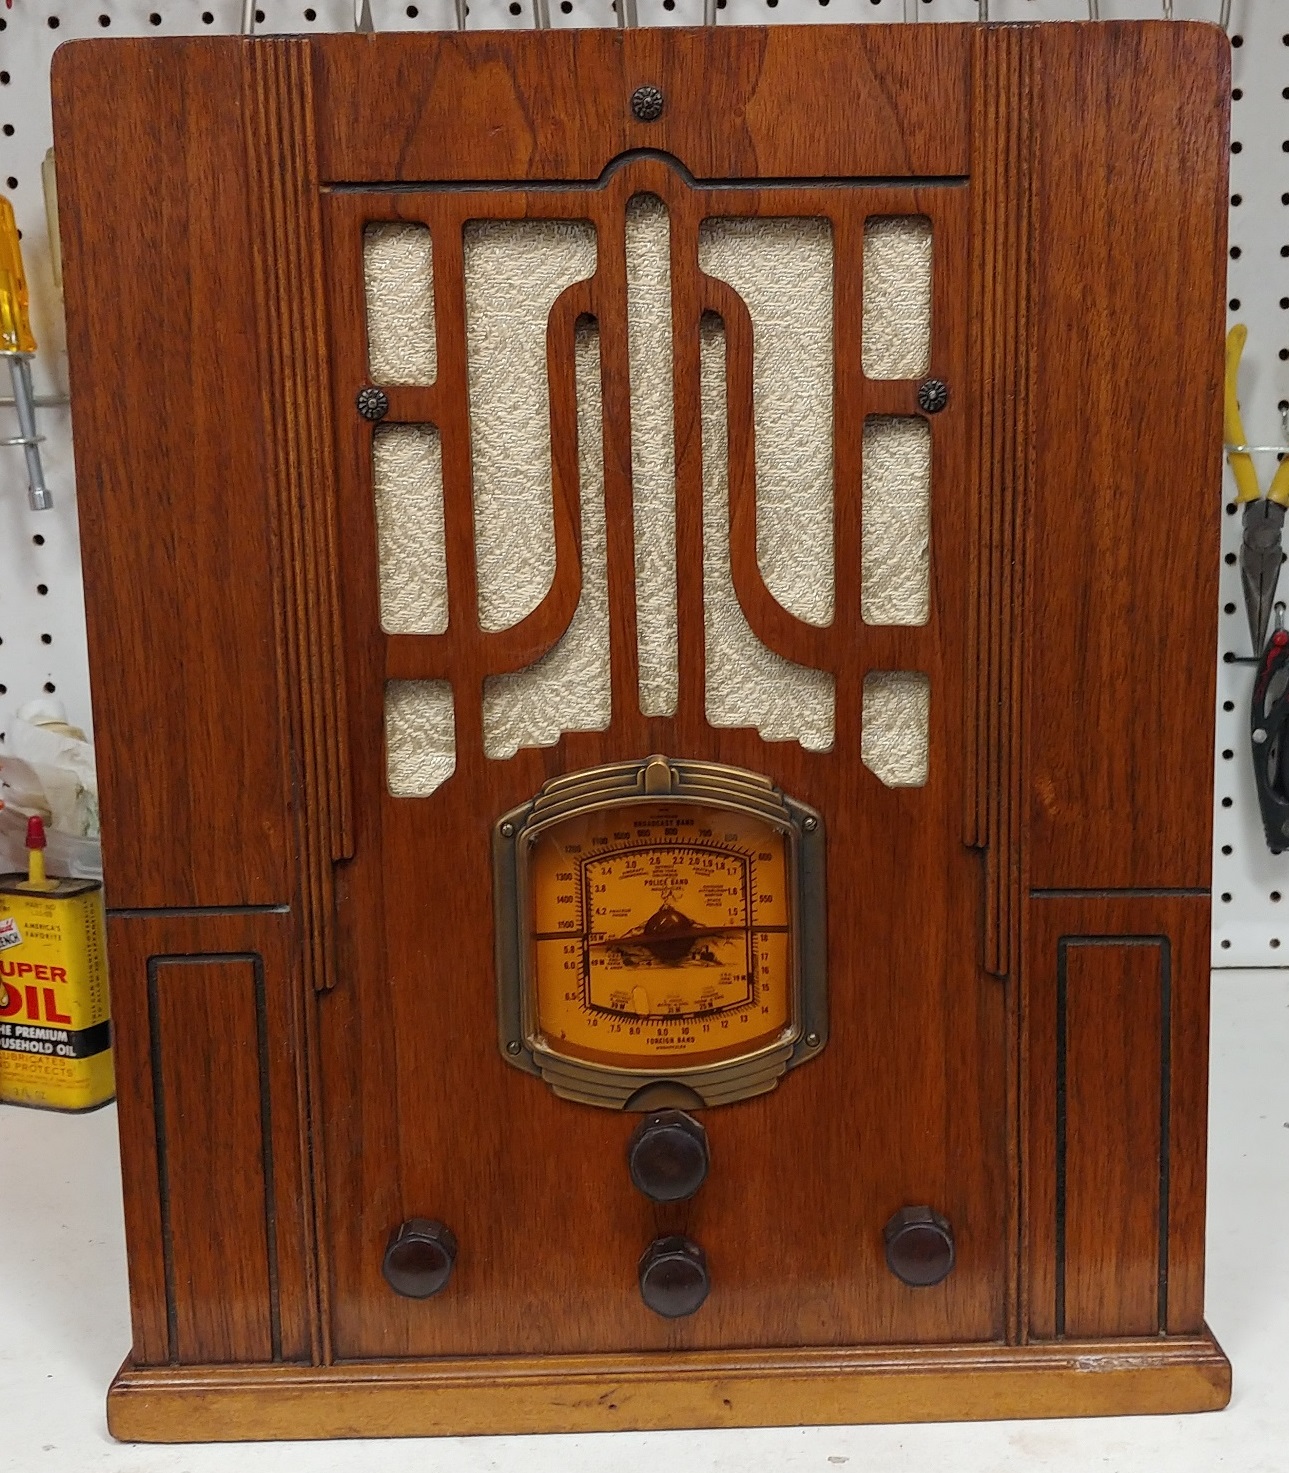 Aetna 19A66W Tombstone Radio